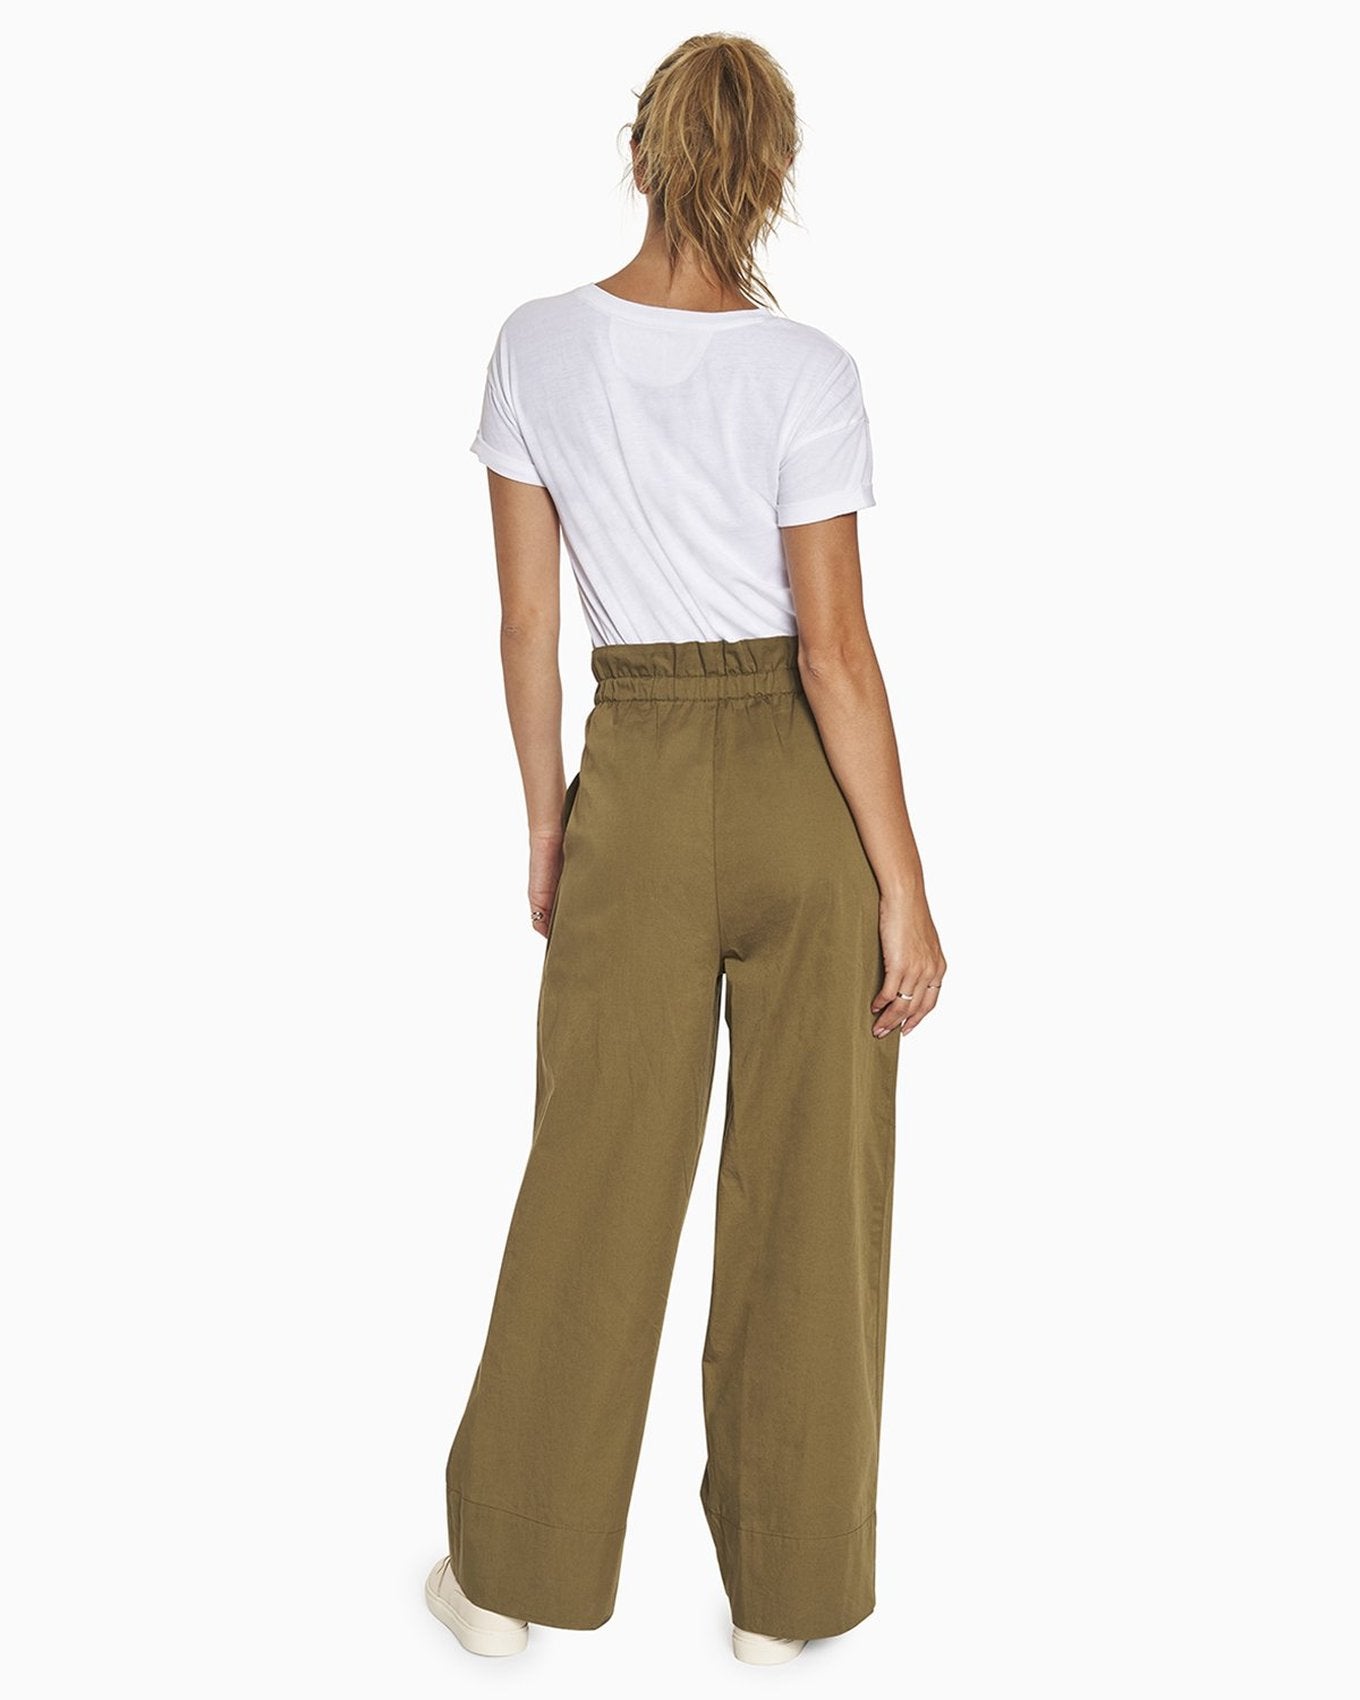 YesAnd Organic Paperbag Wide Leg Pant Wide Leg Pant in color Olive Branch and shape pants